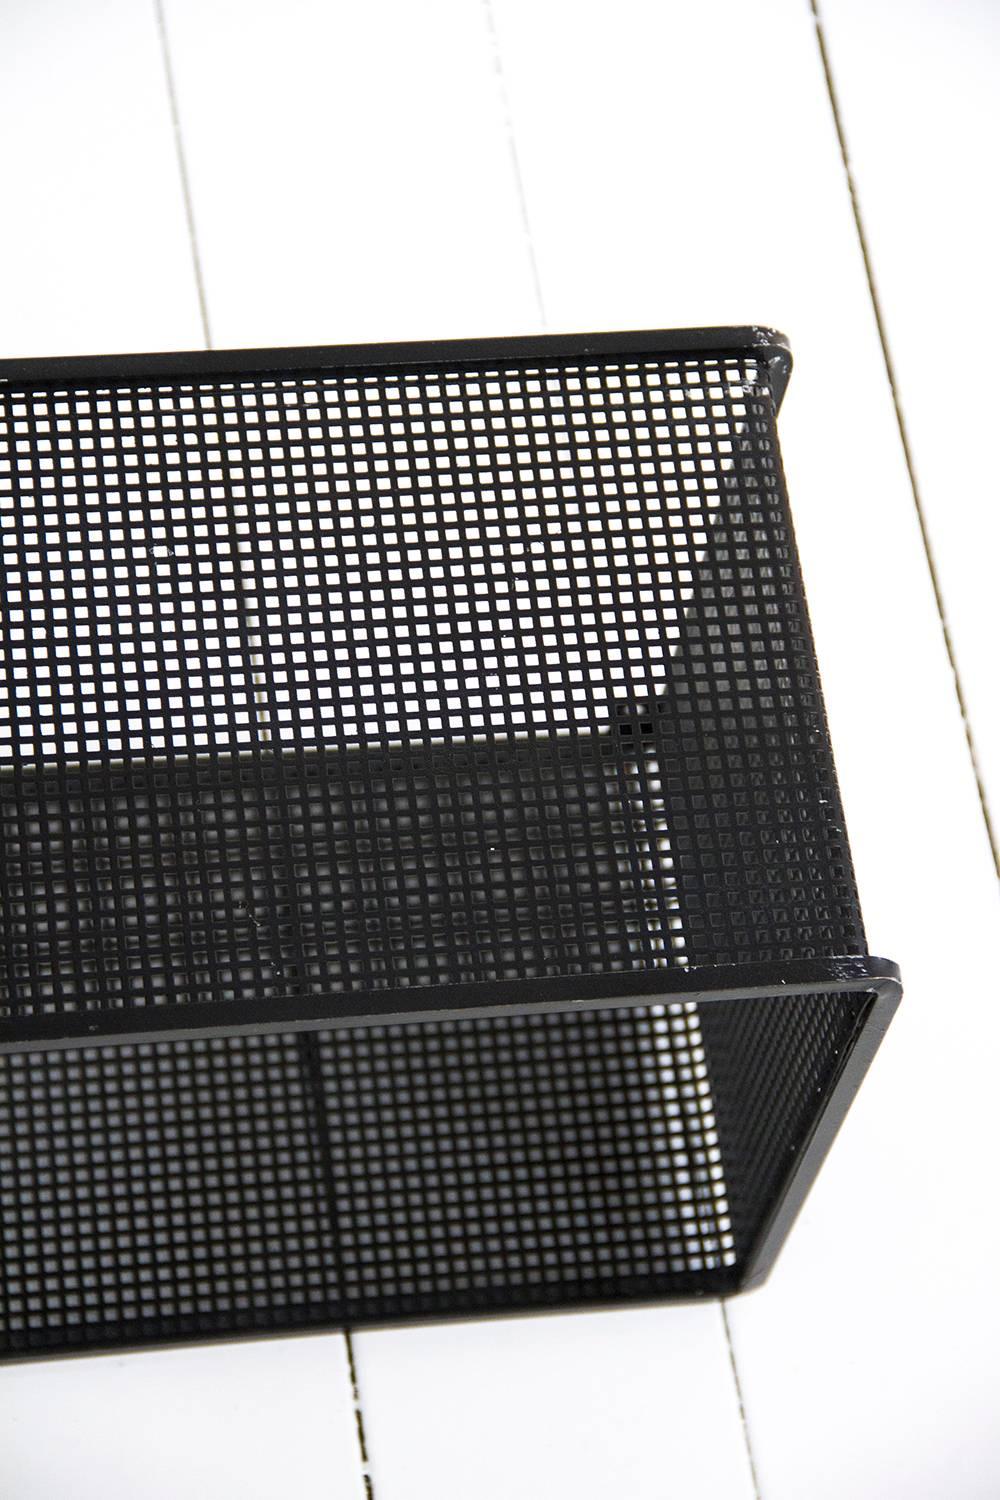 French Black Dedal Wall Shelf by Mathieu Mategot, Perforated Steel, circa 1950, France